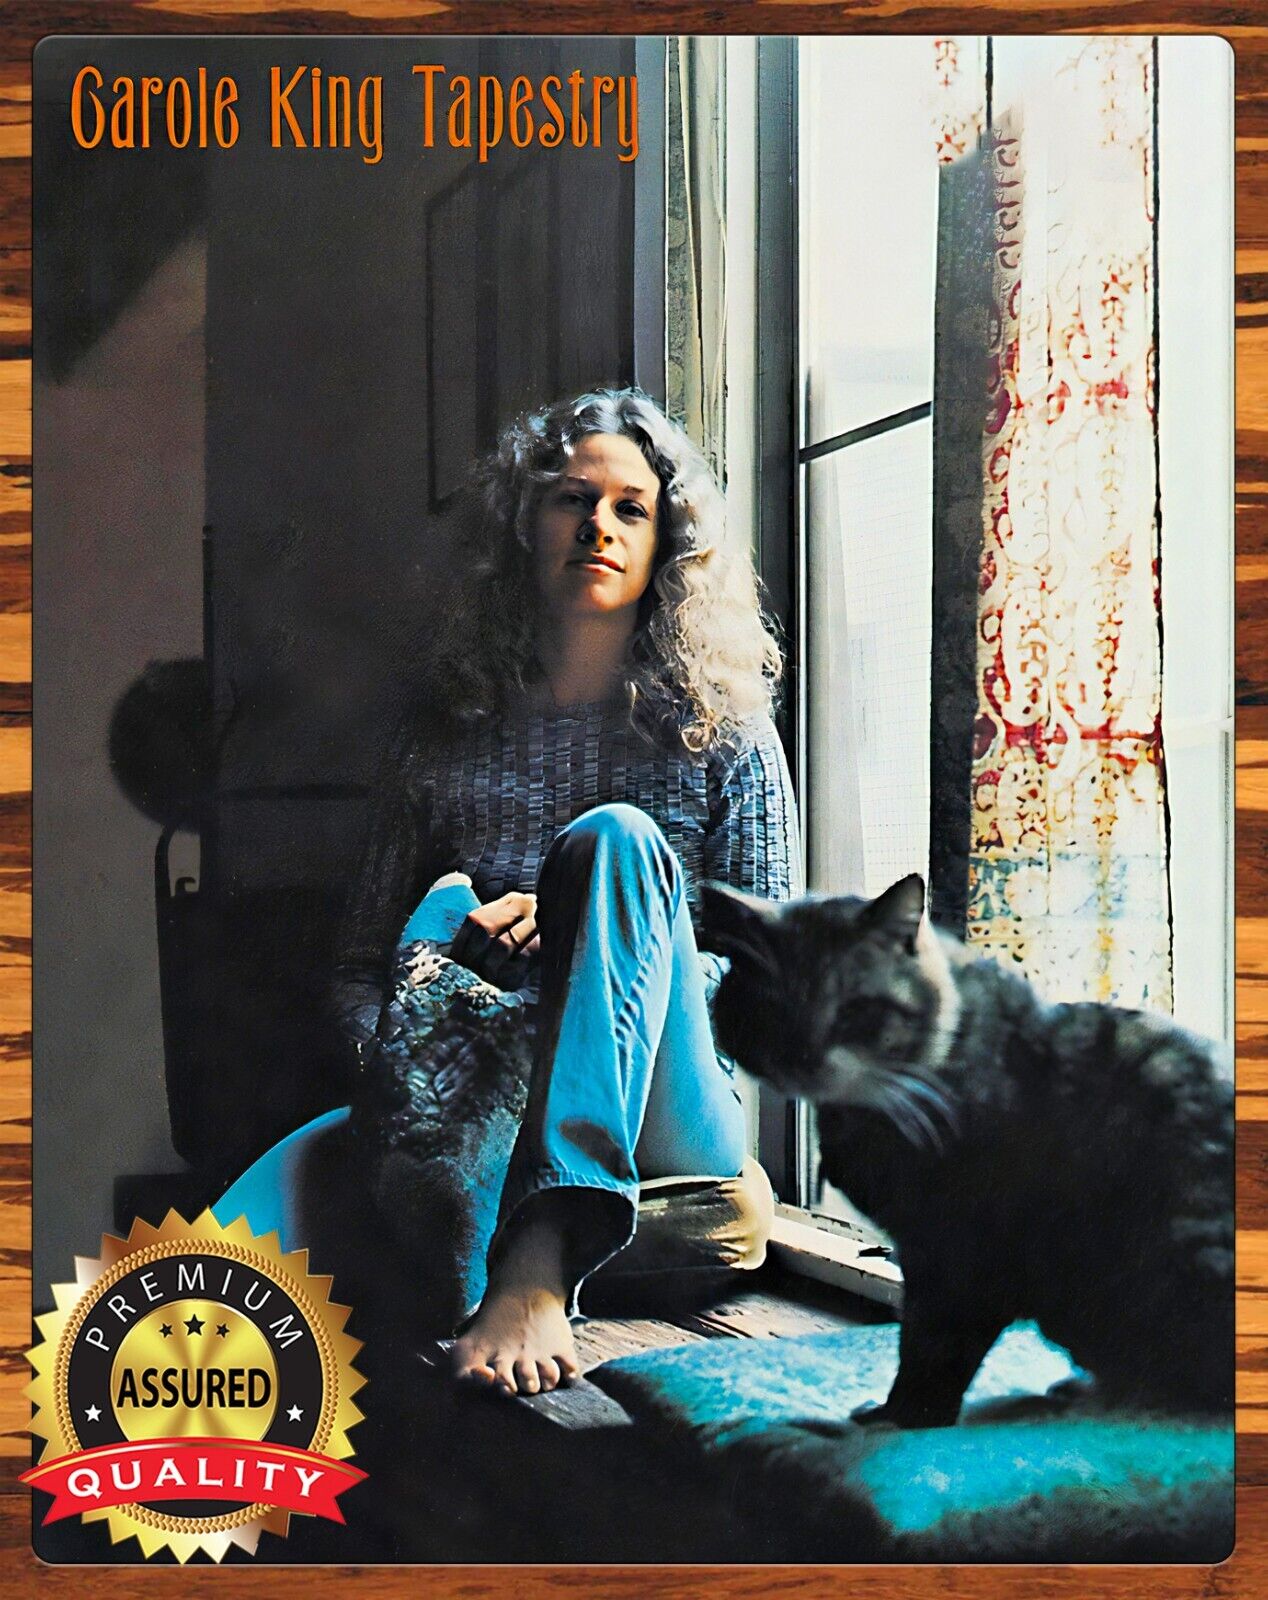 Carole King - Tapestry - Metal Sign 11 x 14